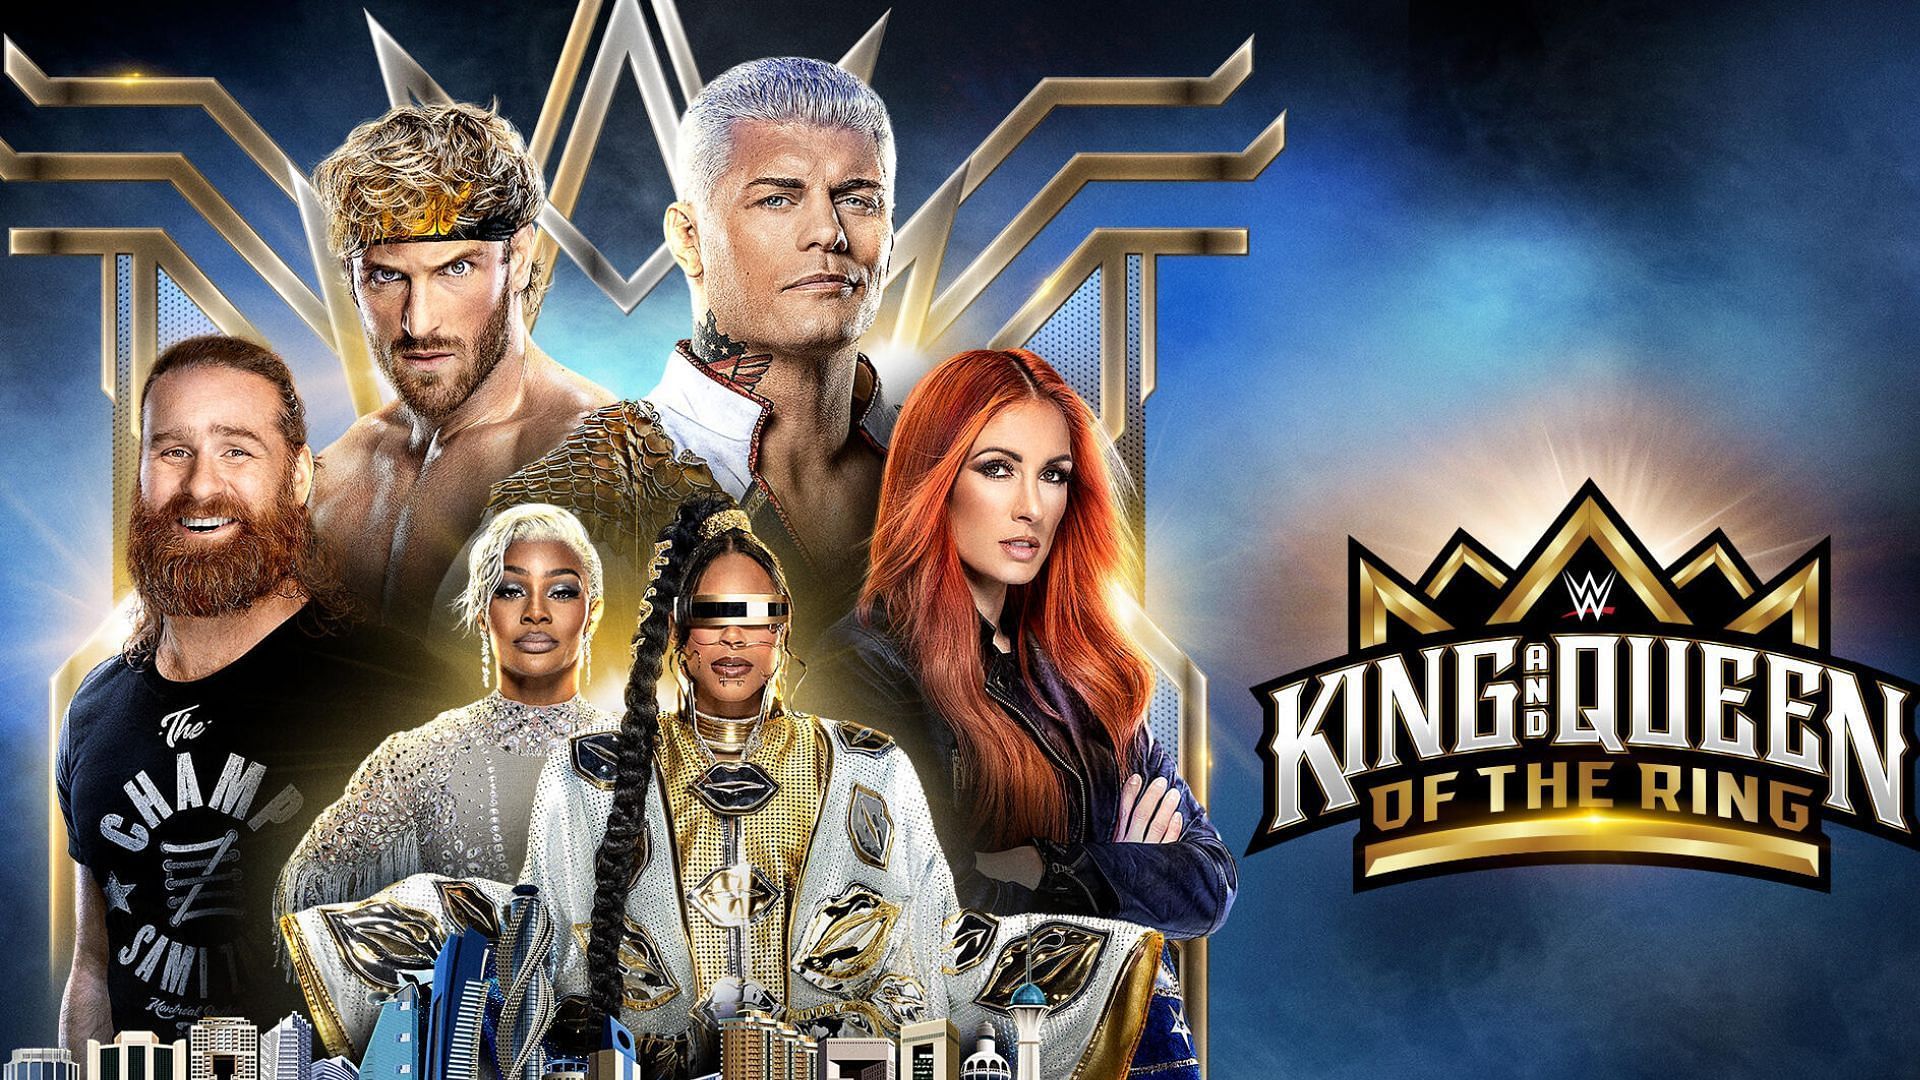 What does WWE have planned for The King and Queen of The Ring?